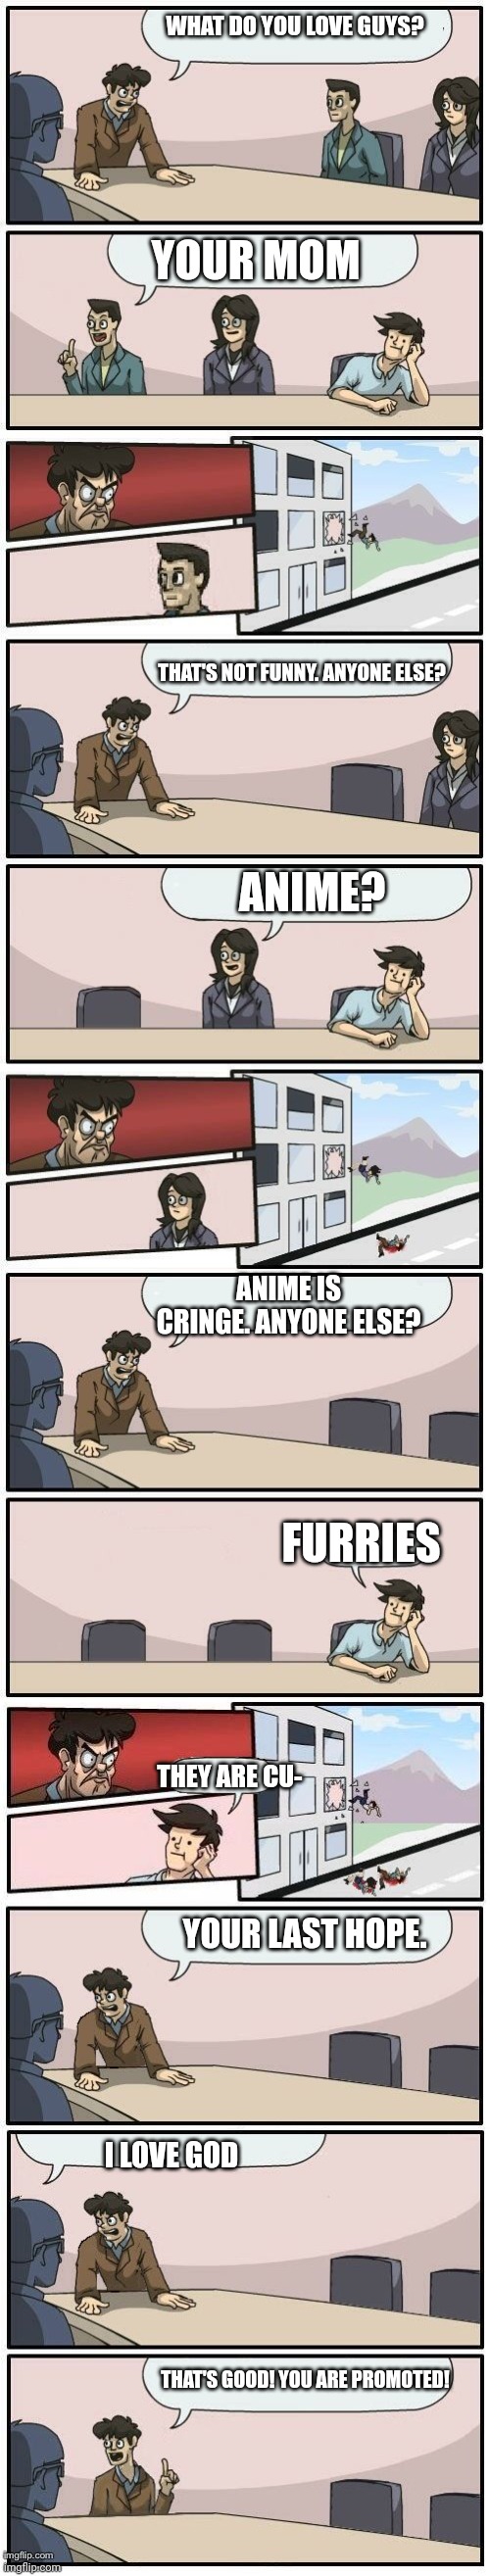 BMSE(Boardroom meeting suggestion extended) | WHAT DO YOU LOVE GUYS? YOUR MOM; ANIME? THAT'S NOT FUNNY. ANYONE ELSE? FURRIES; ANIME IS CRINGE. ANYONE ELSE? THEY ARE CU-; YOUR LAST HOPE. I LOVE GOD; THAT'S GOOD! YOU ARE PROMOTED! | image tagged in boardroom meeting suggestions extended | made w/ Imgflip meme maker